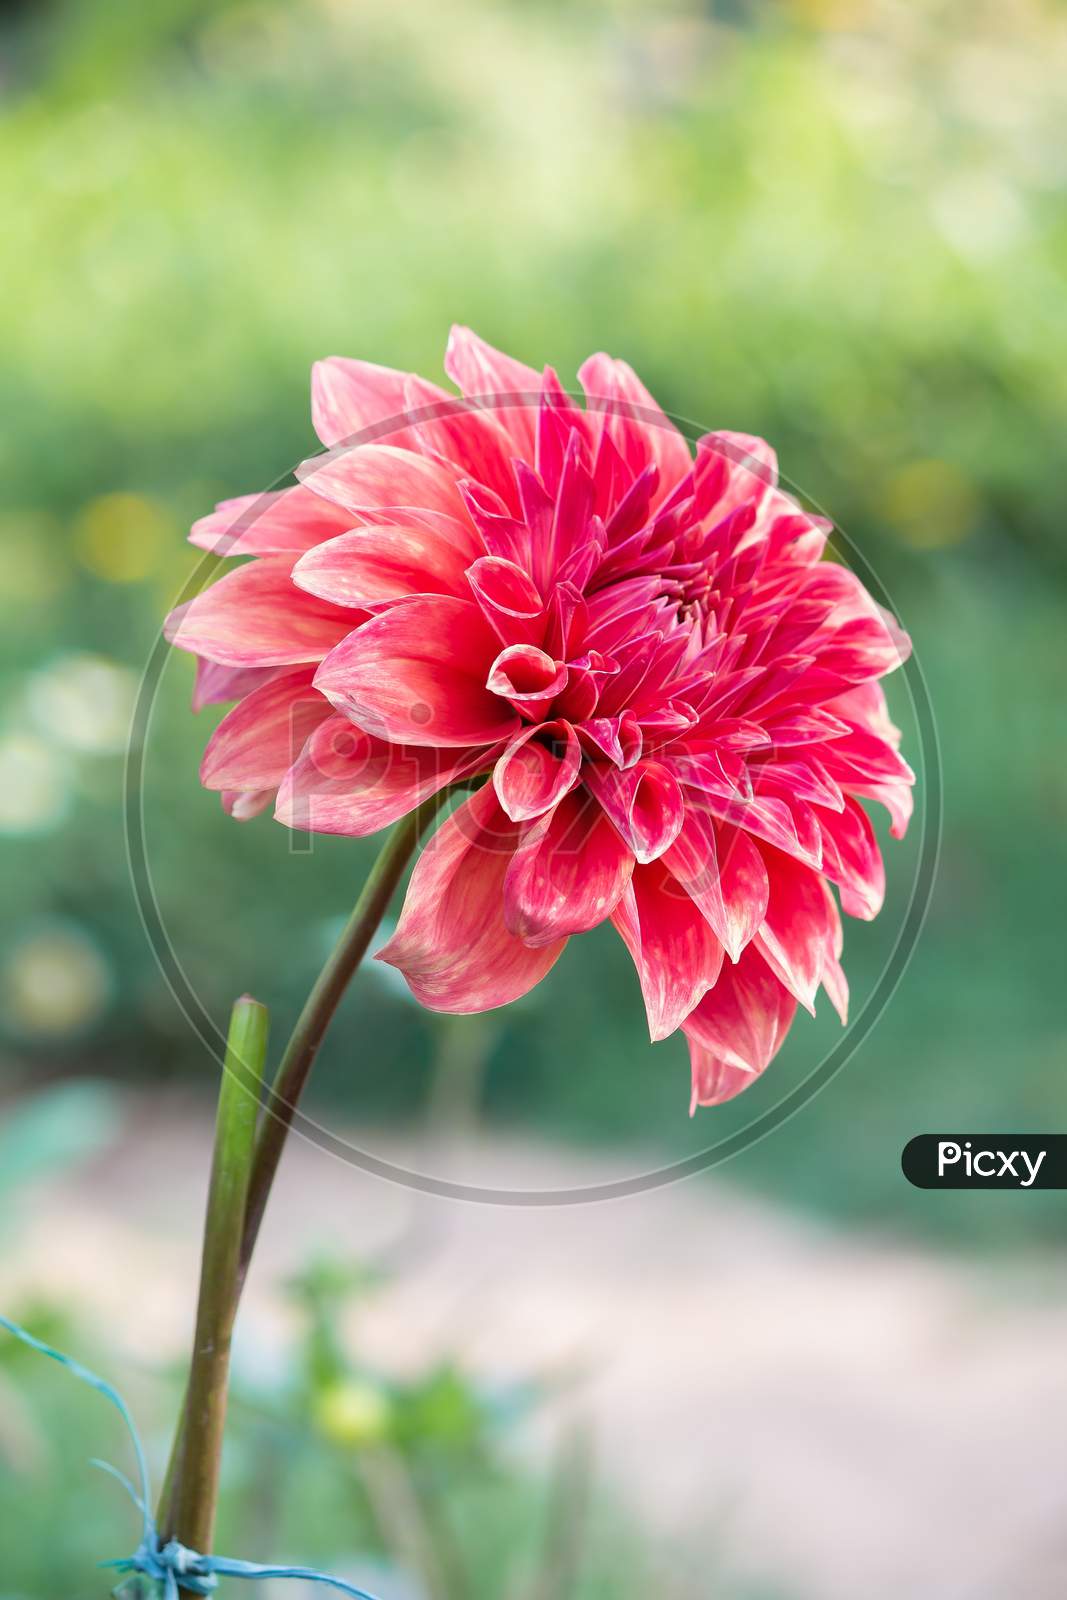 View Of Red Daisy Flower In The Park Over Green Blur Garden Background In Vertical Frame